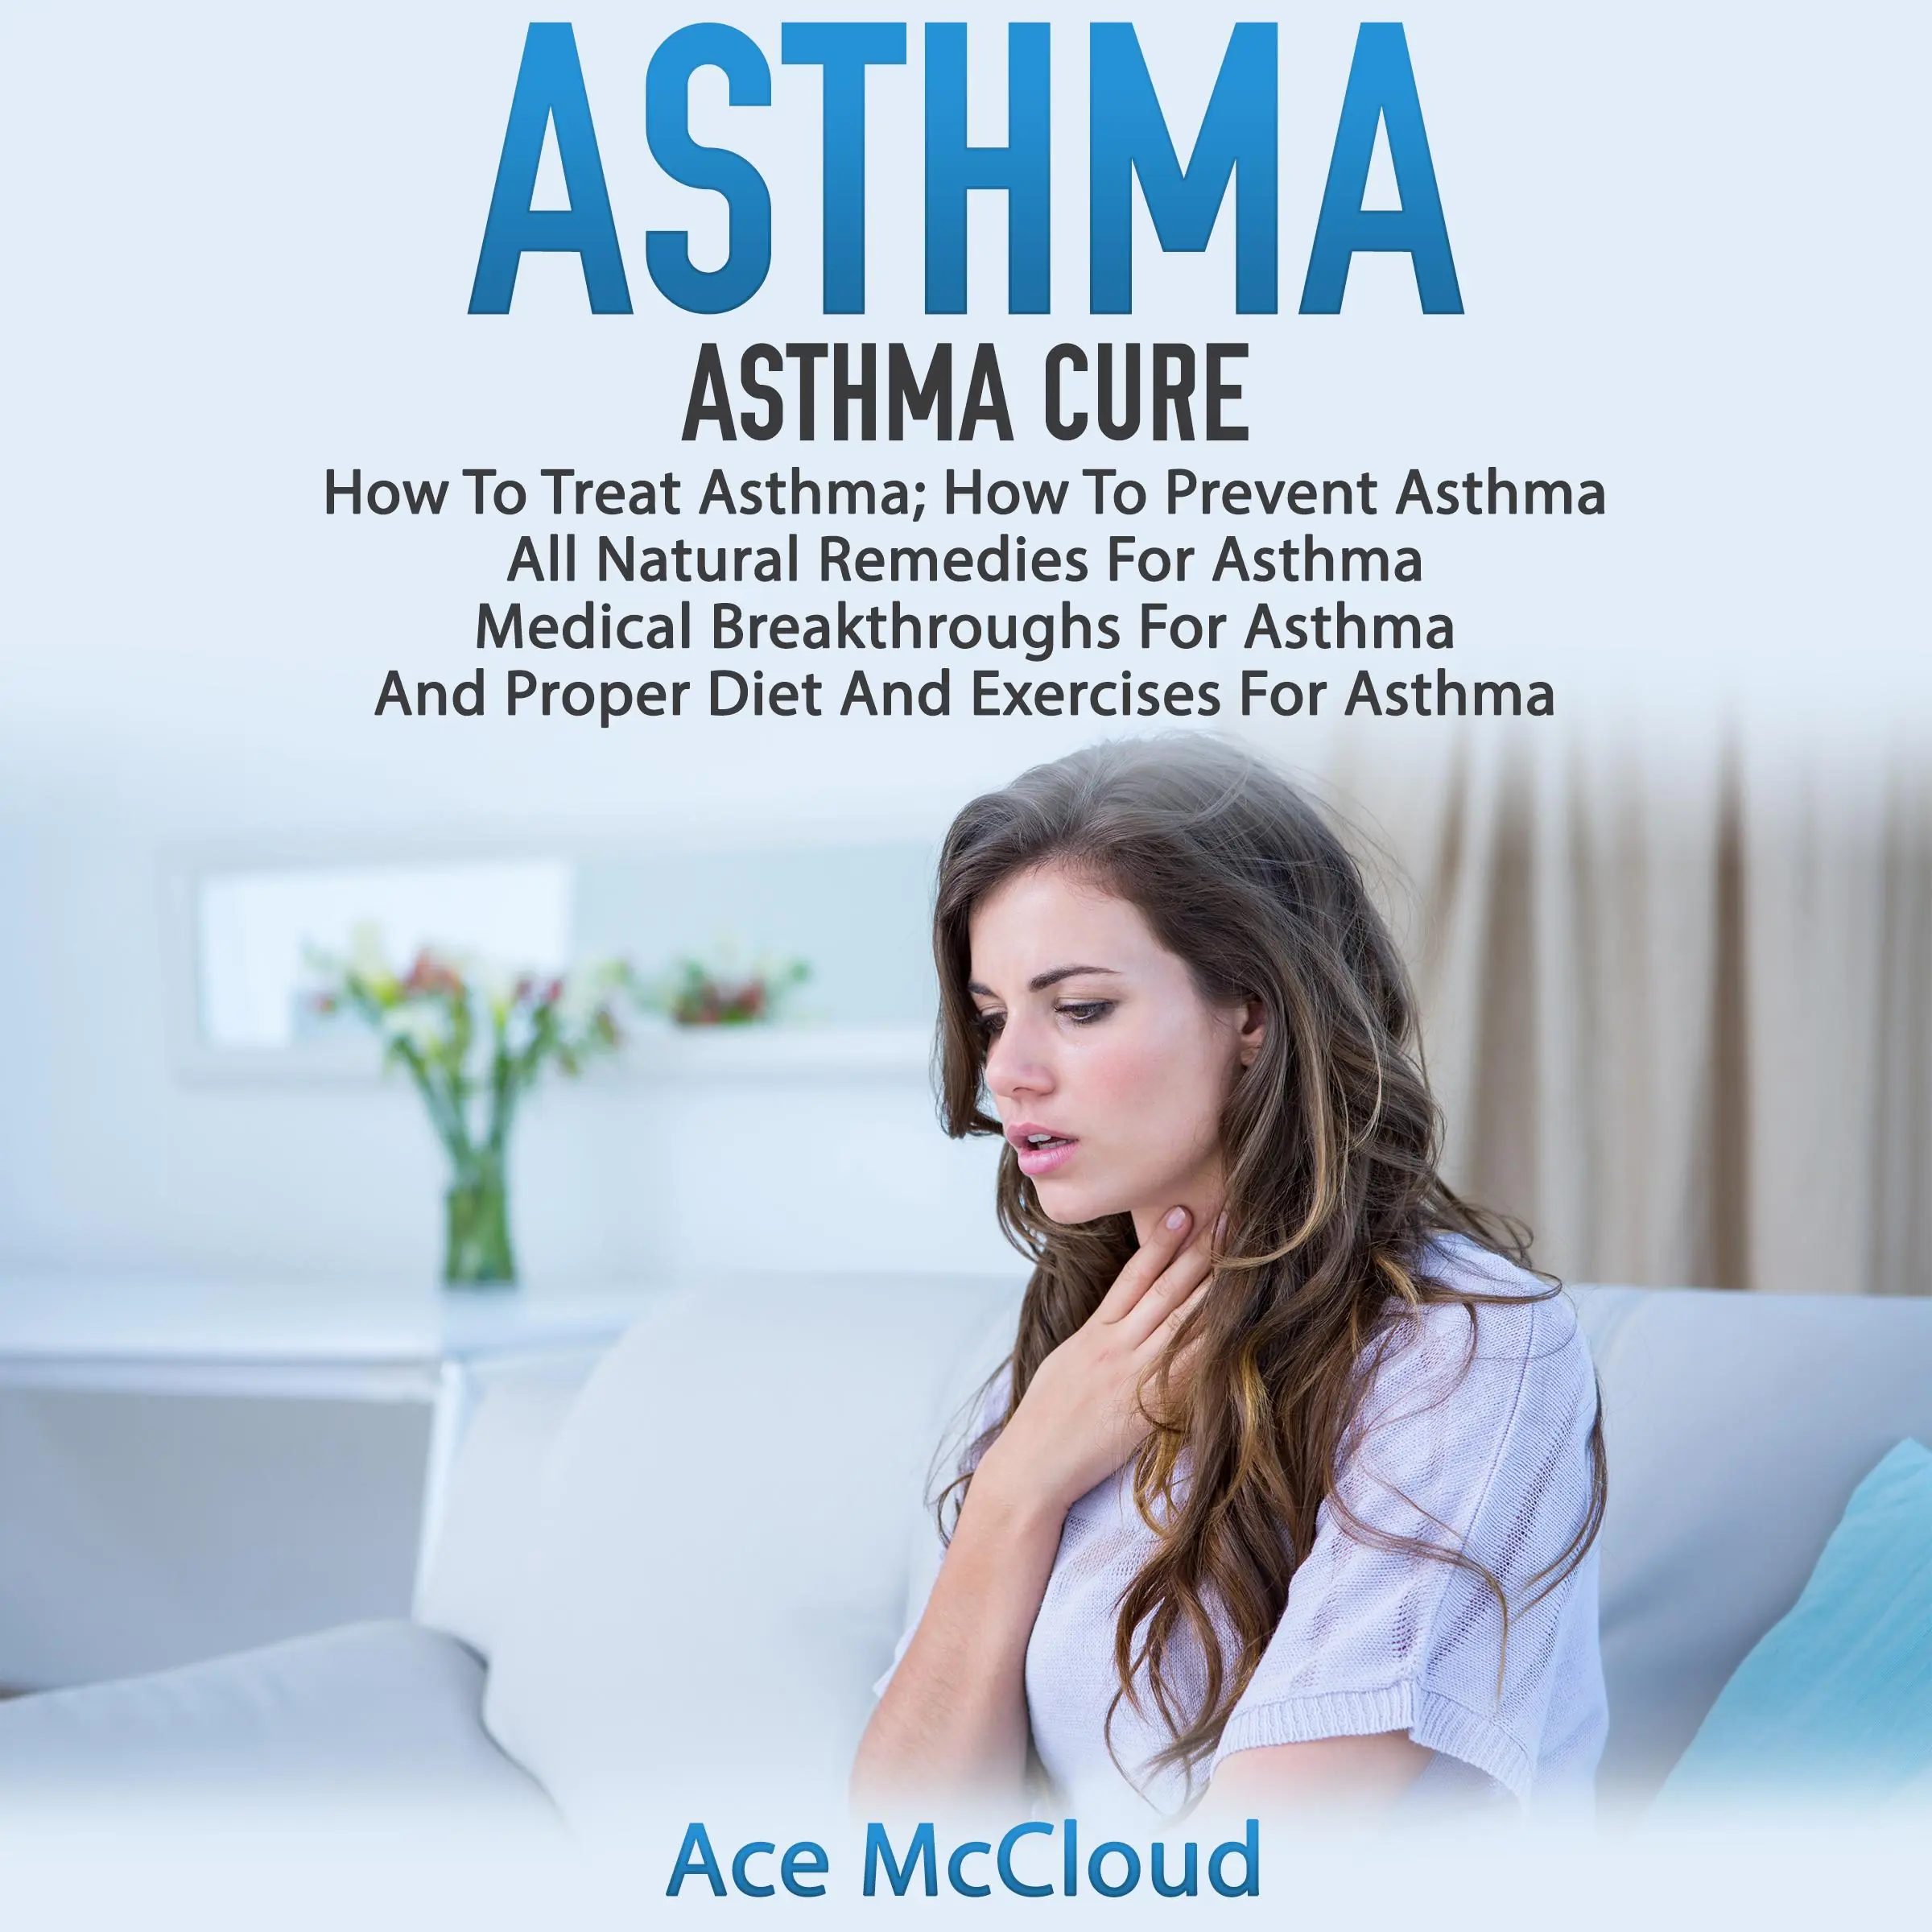 Asthma: Asthma Cure: How To Treat Asthma: How To Prevent Asthma, All Natural Remedies For Asthma, Medical Breakthroughs For Asthma, And Proper Diet And Exercises For Asthma Audiobook by Ace McCloud